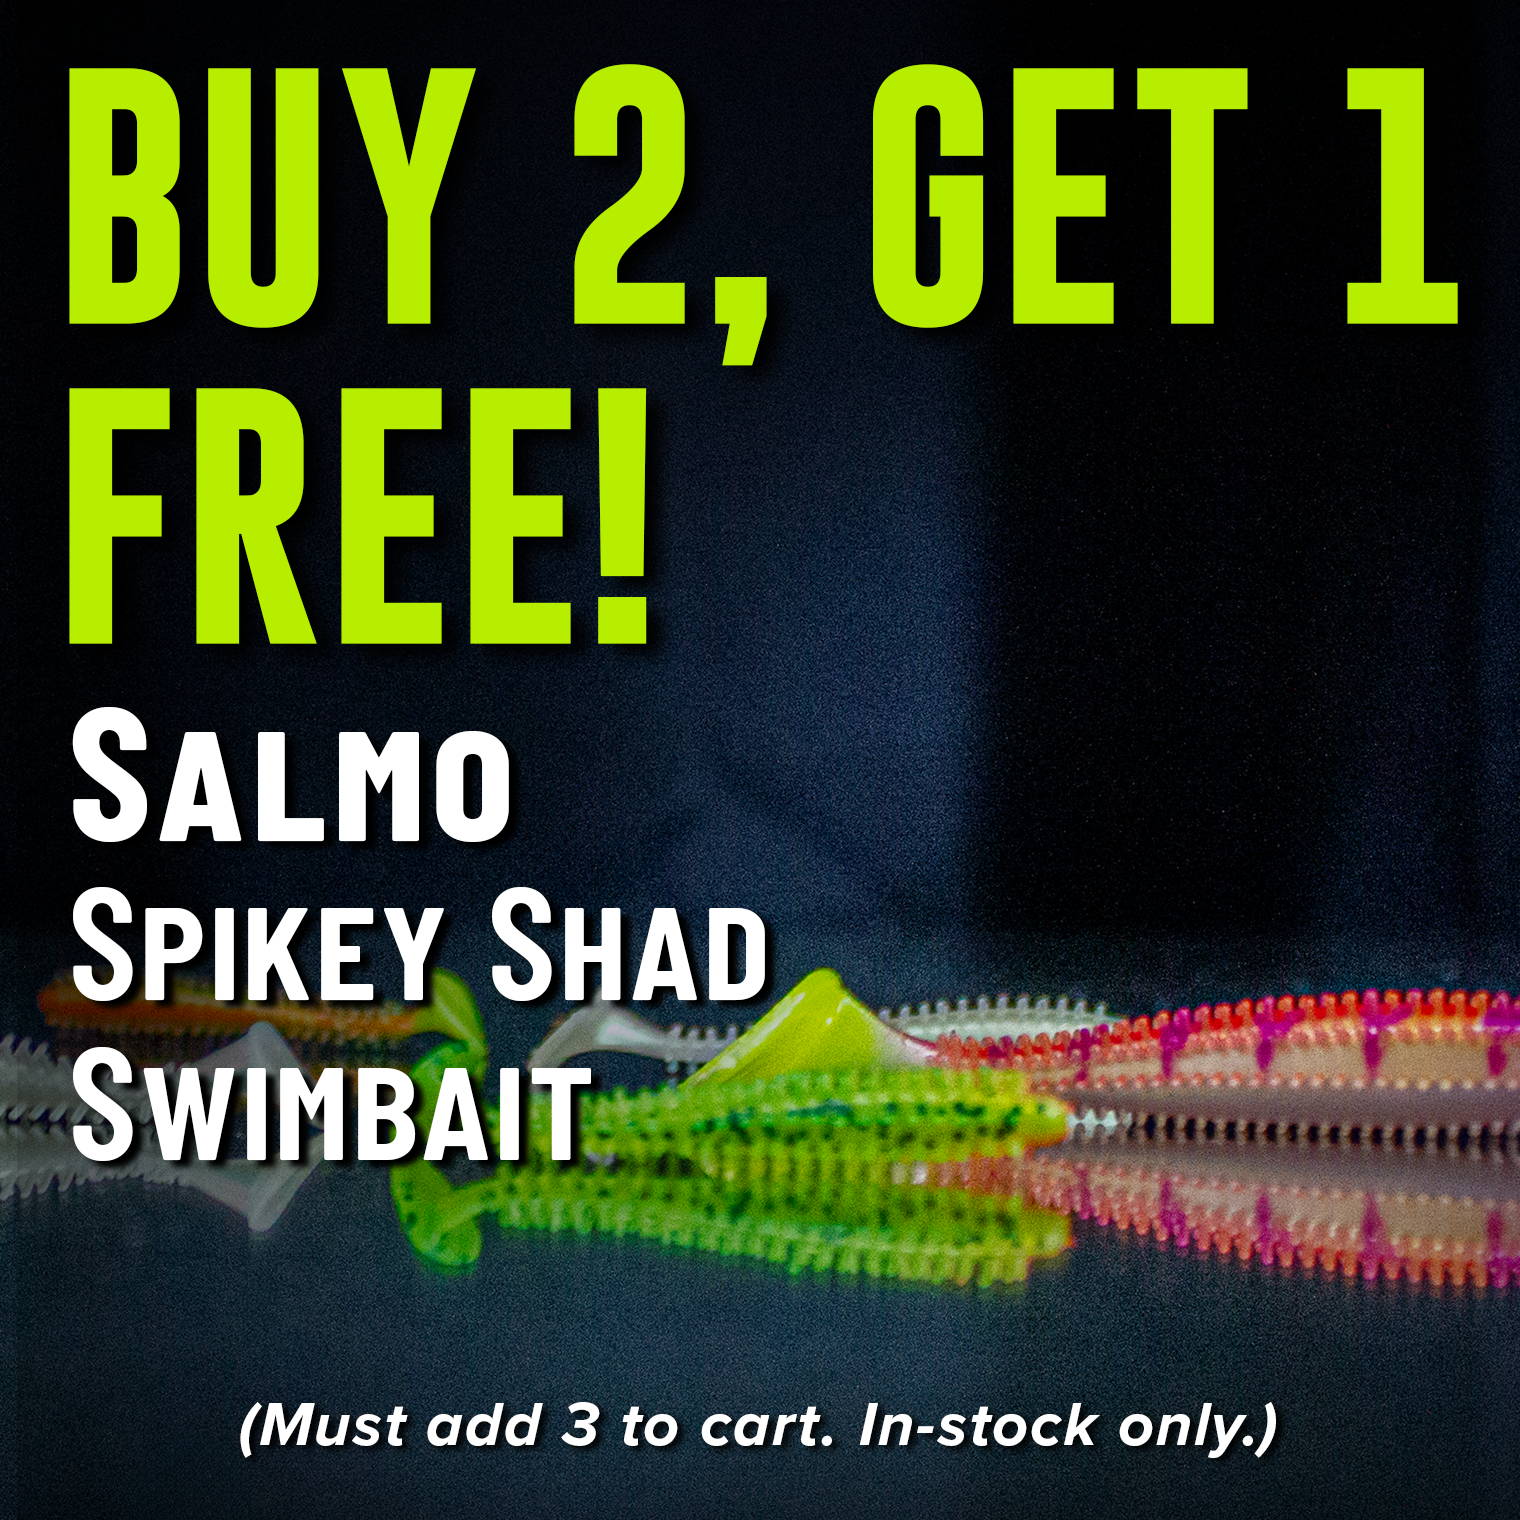 Buy 2, Get 1 Free! Salmo Spikey Shad Swimbait (Must add 3 to cart. In-stock only.)